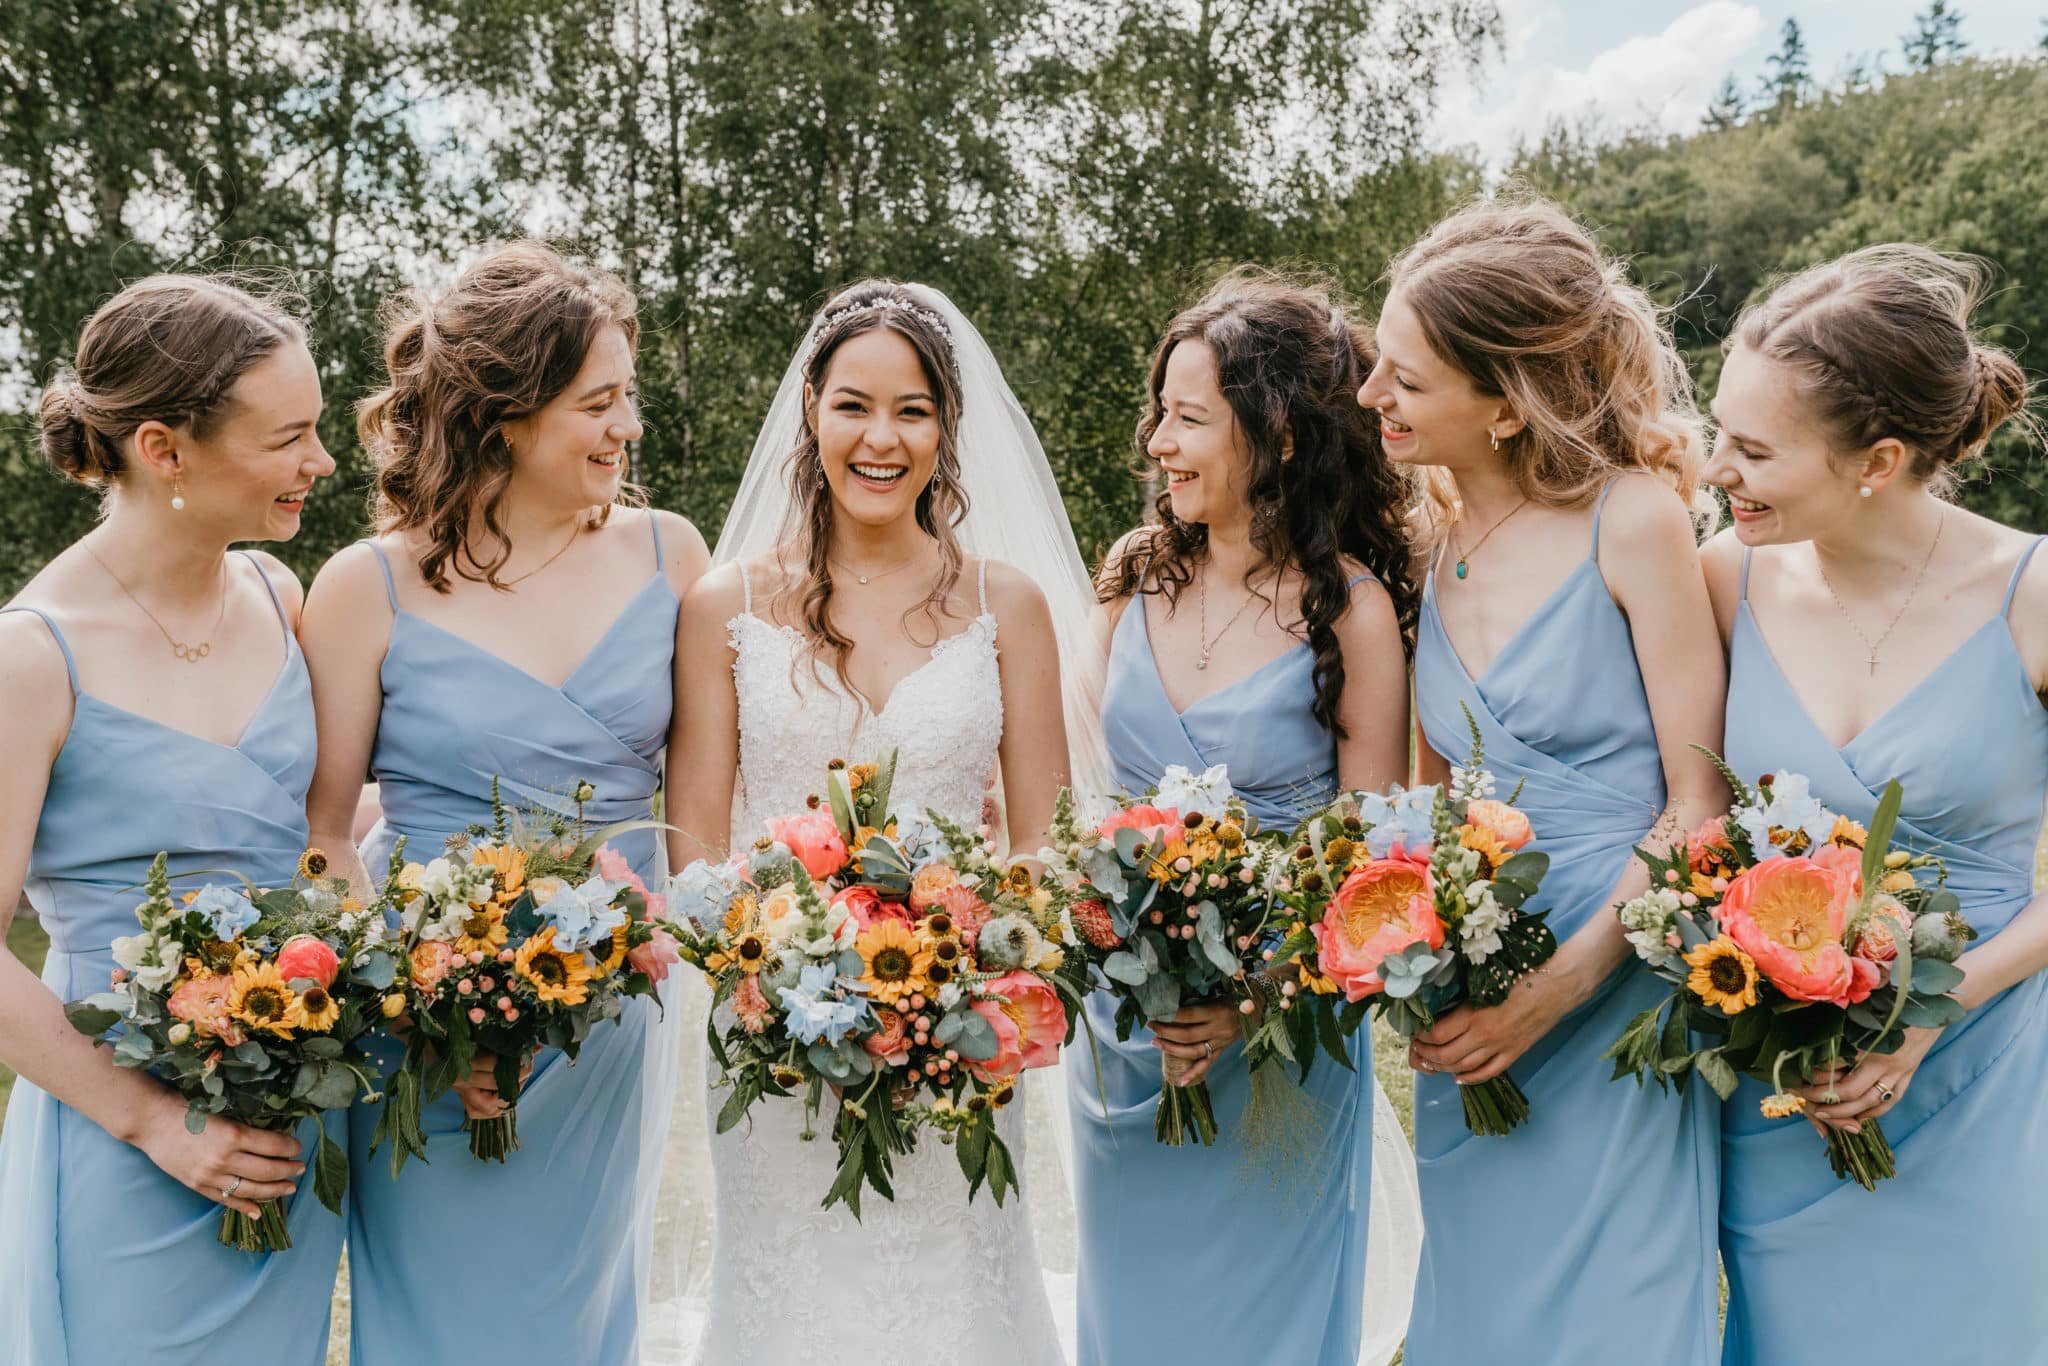 Bride (Lydia) with her bridesmaids